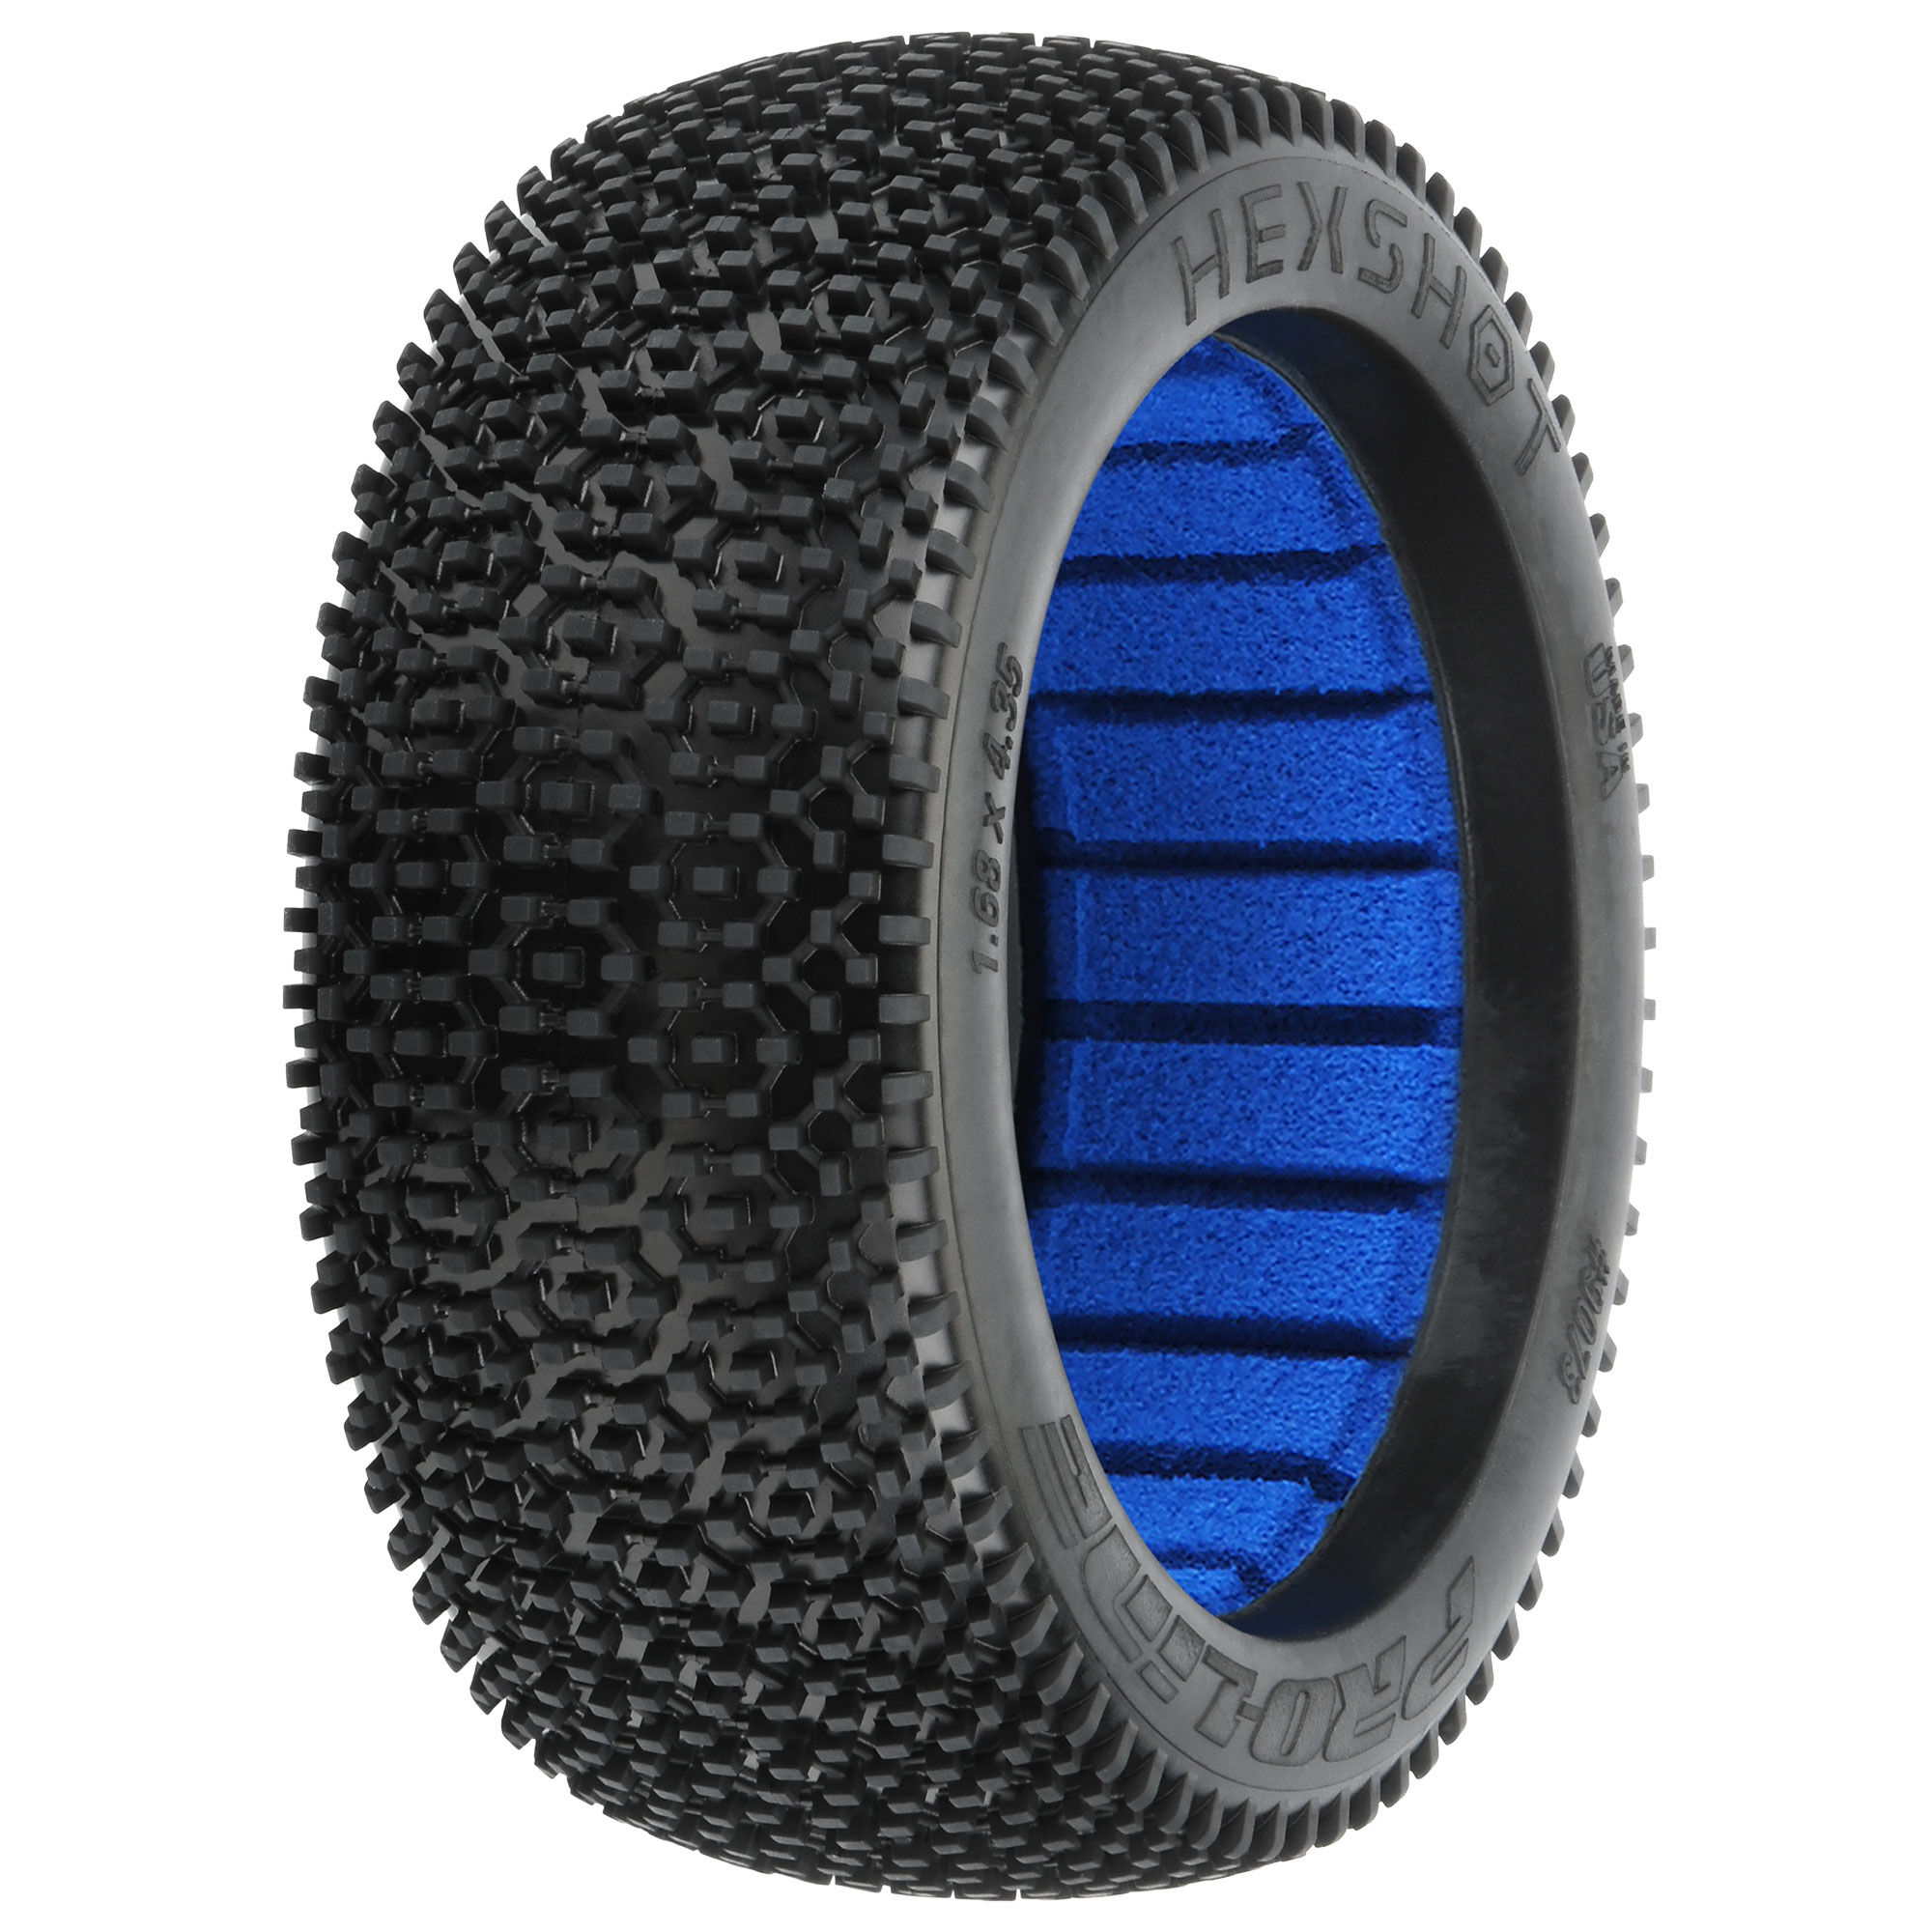 S4 2 Pro-Line Hole Shot 2.0 1/8 Buggy Tires w/Closed Cell Inserts 